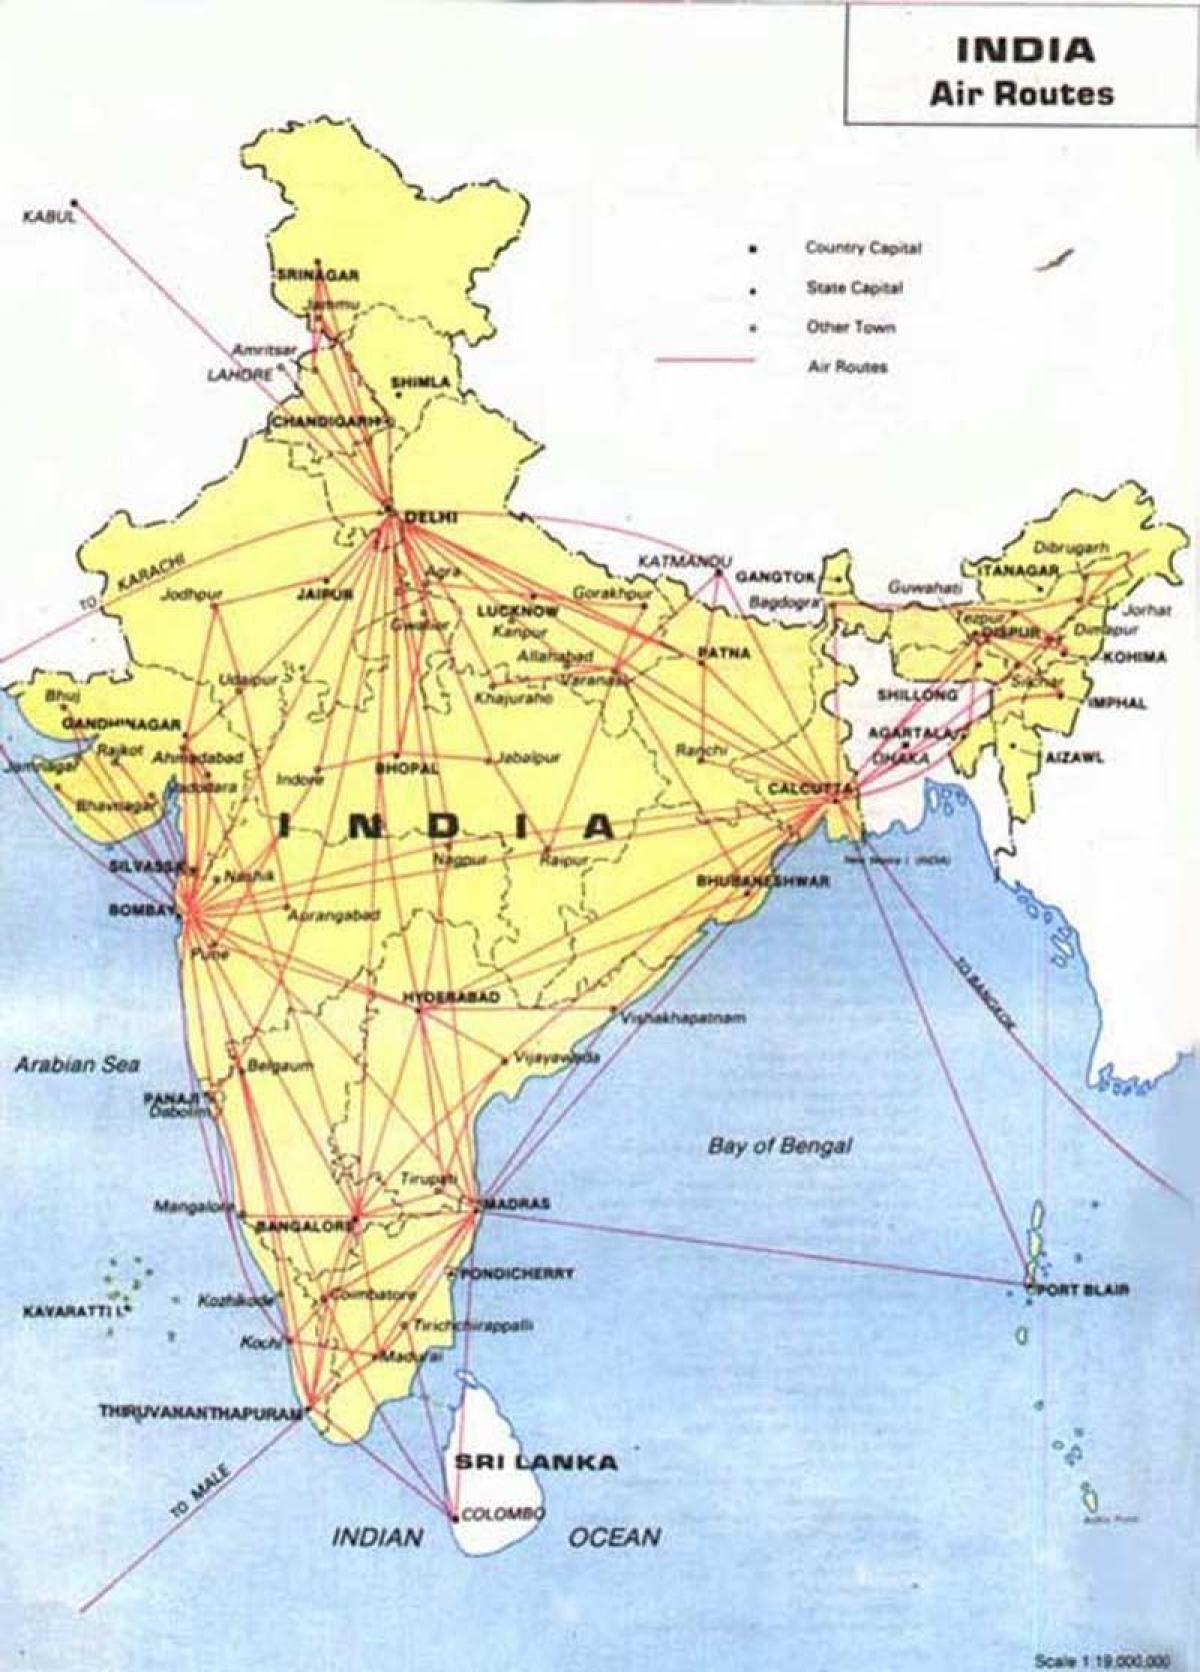 Flight route map India - Flight route map of India (Southern Asia - Asia)